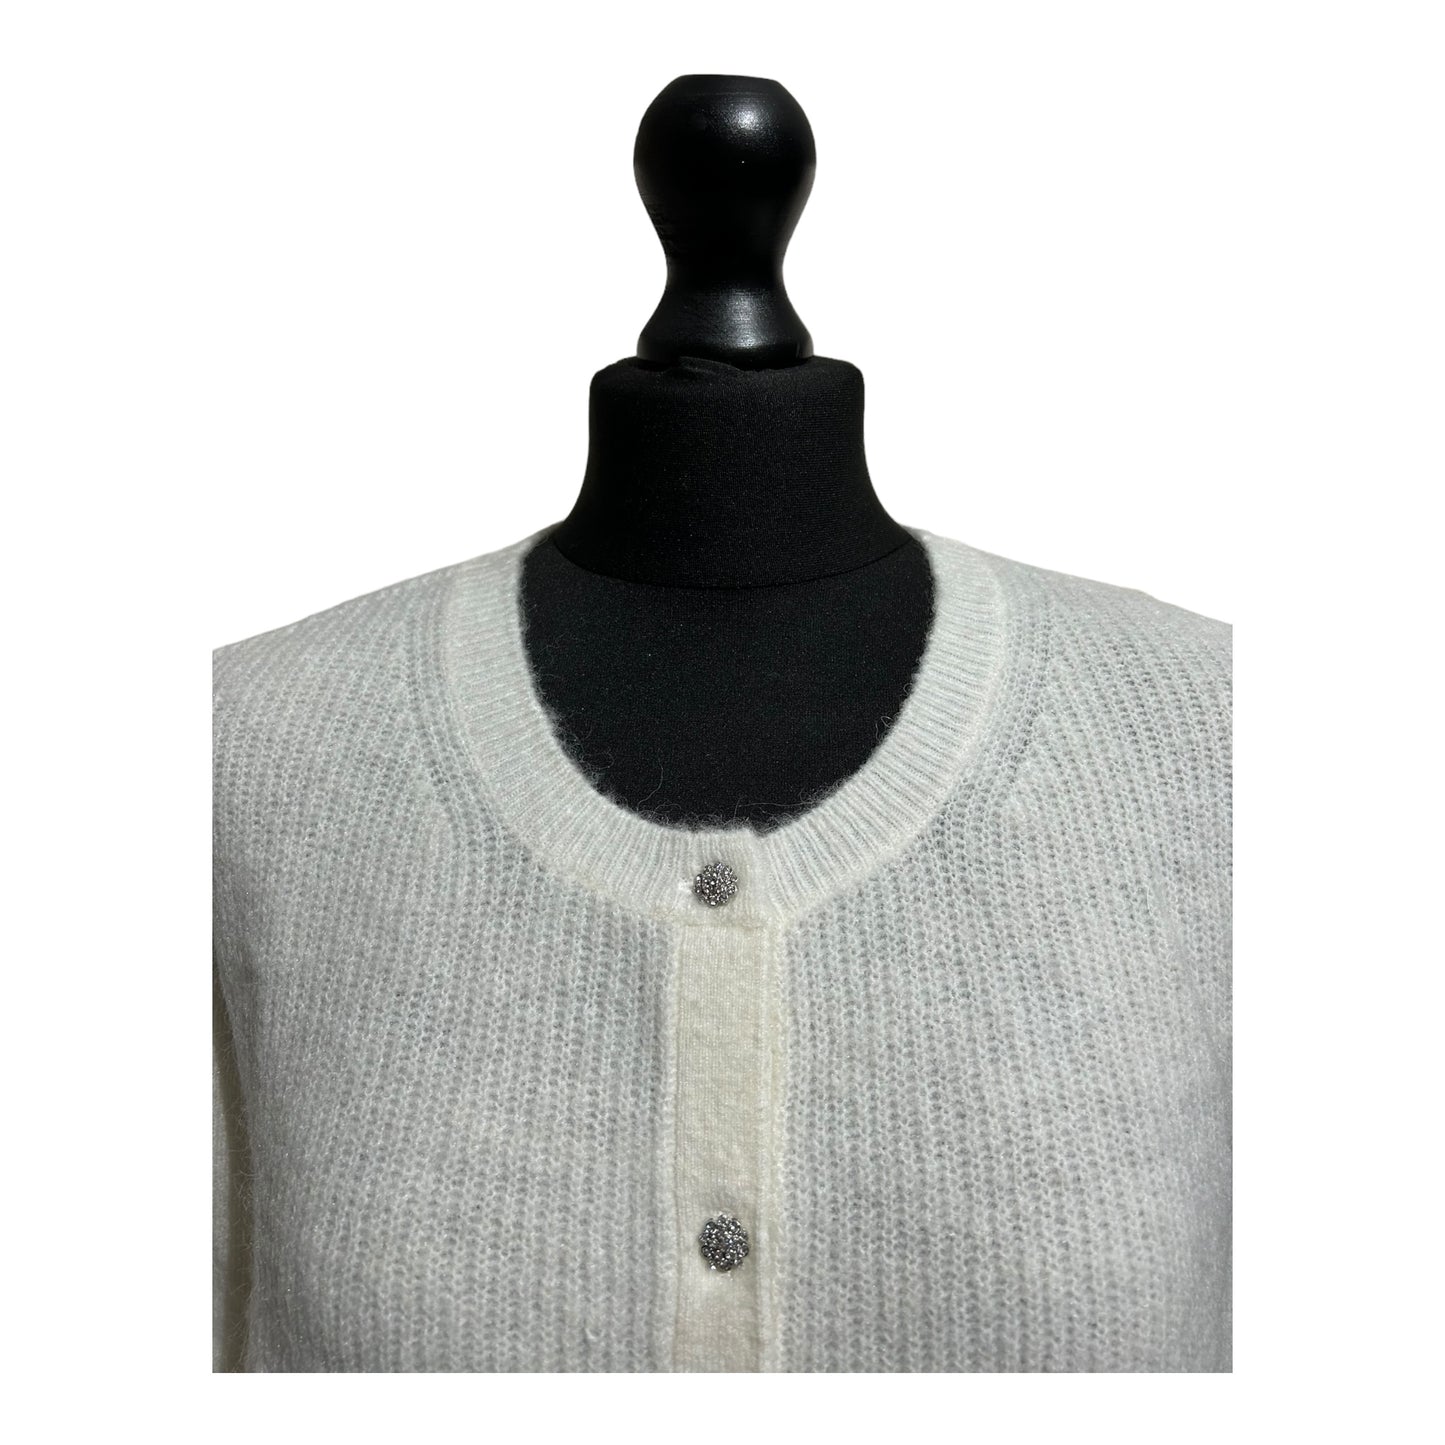 Boden Ivory Jewel Button Wool Blend Cardigan - Recurring.Life